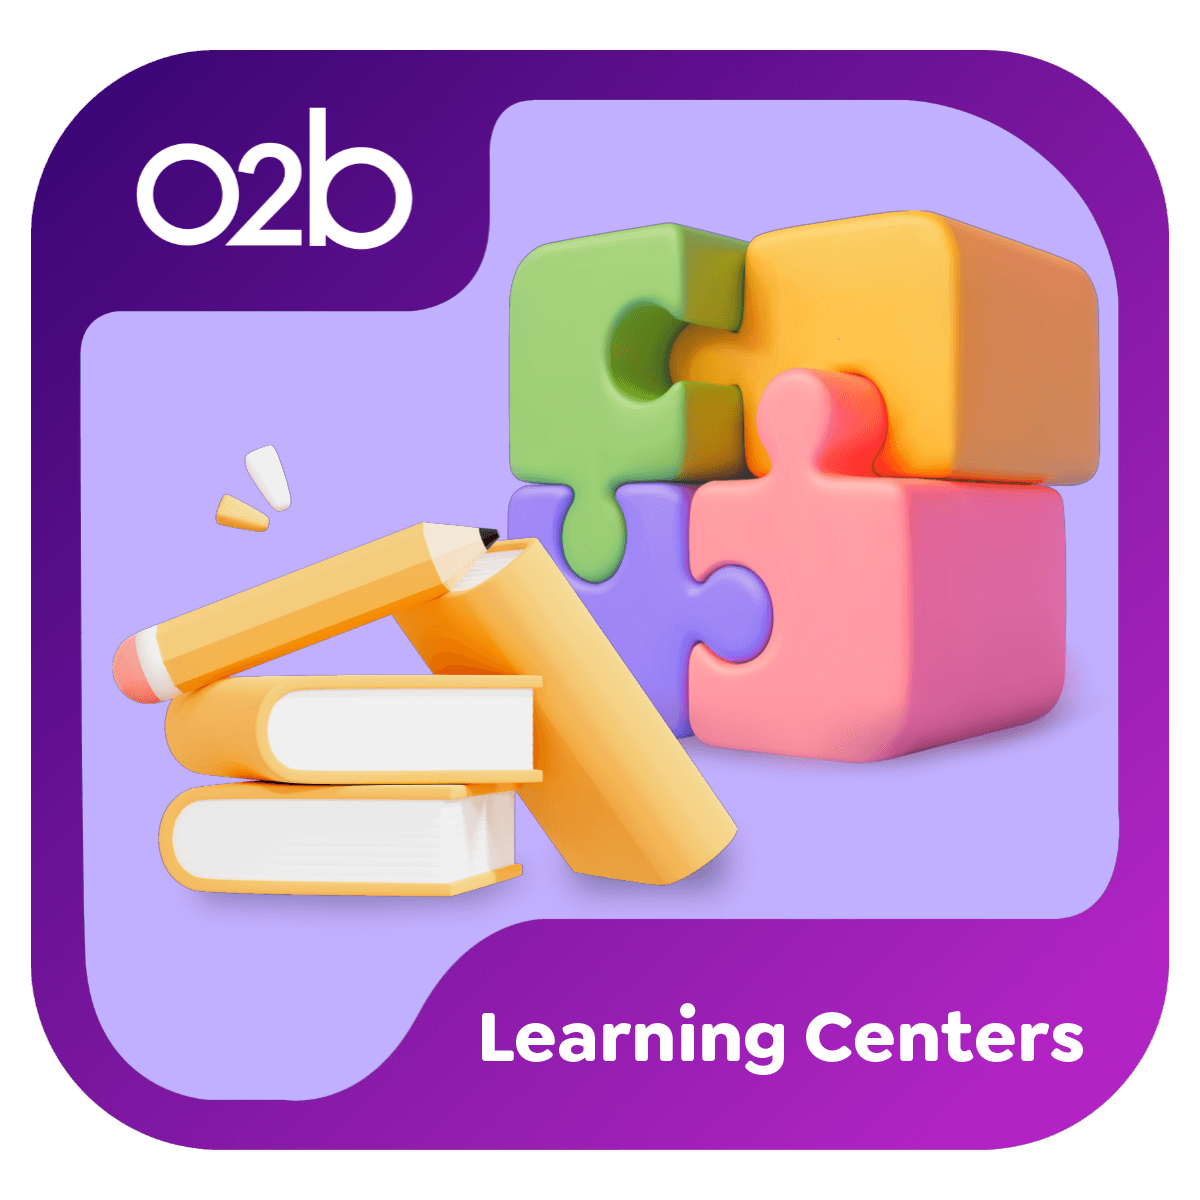 Multicolor puzzle pieces and orange books/pencil on purple background. O2B - Learning Centers